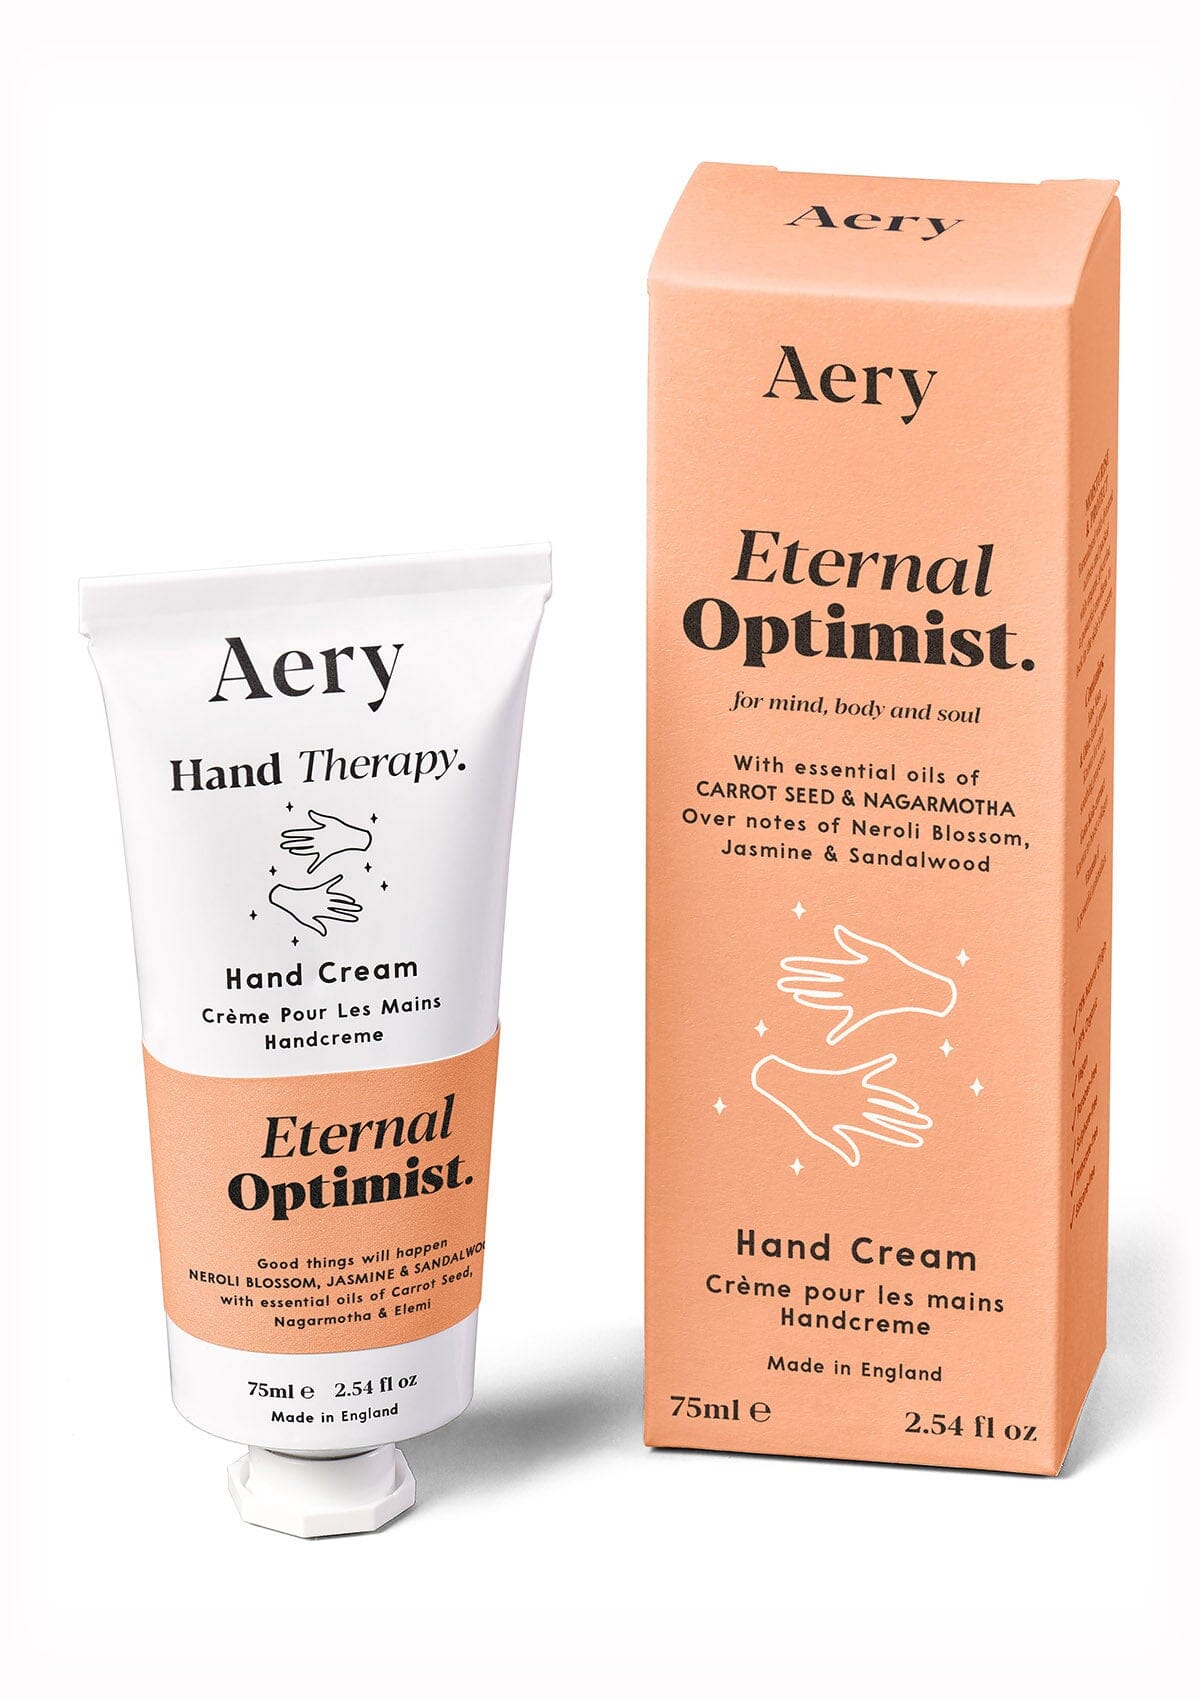 Orange Eternal Optimist hand cream displayed next to product packaging by Aery on white background 